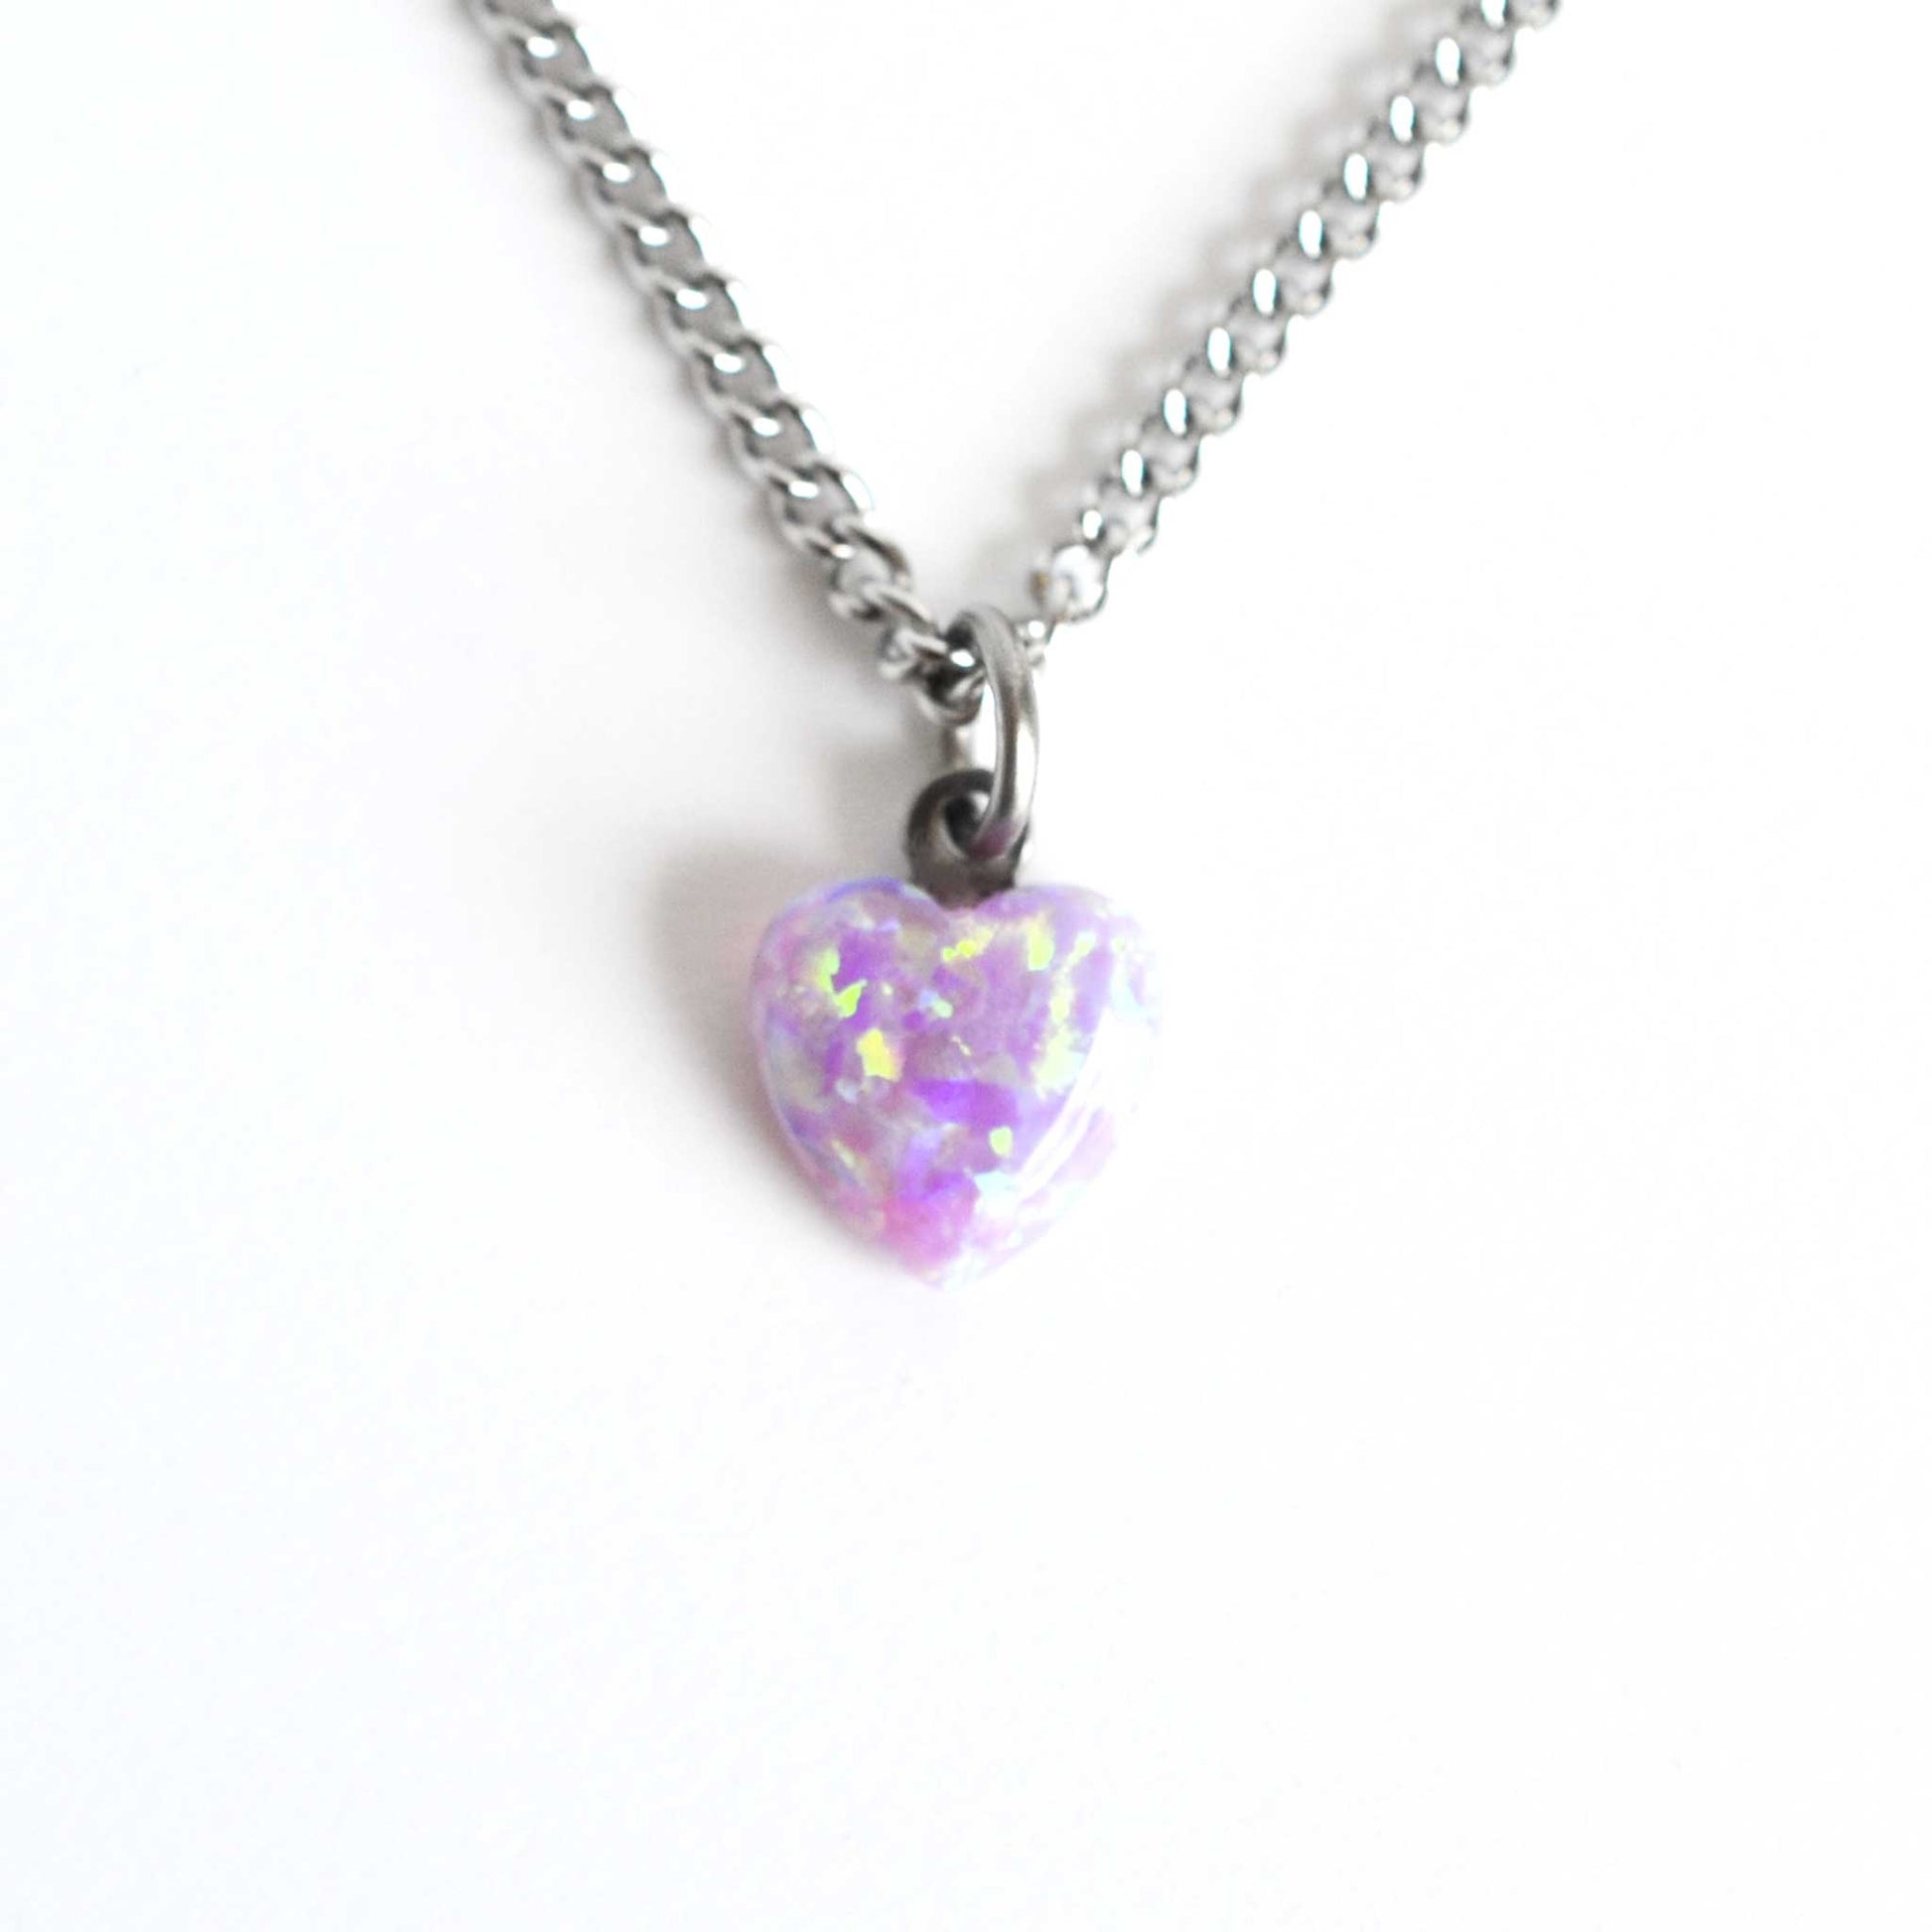 Dainty pink heart necklace with stainless steel chain on white background